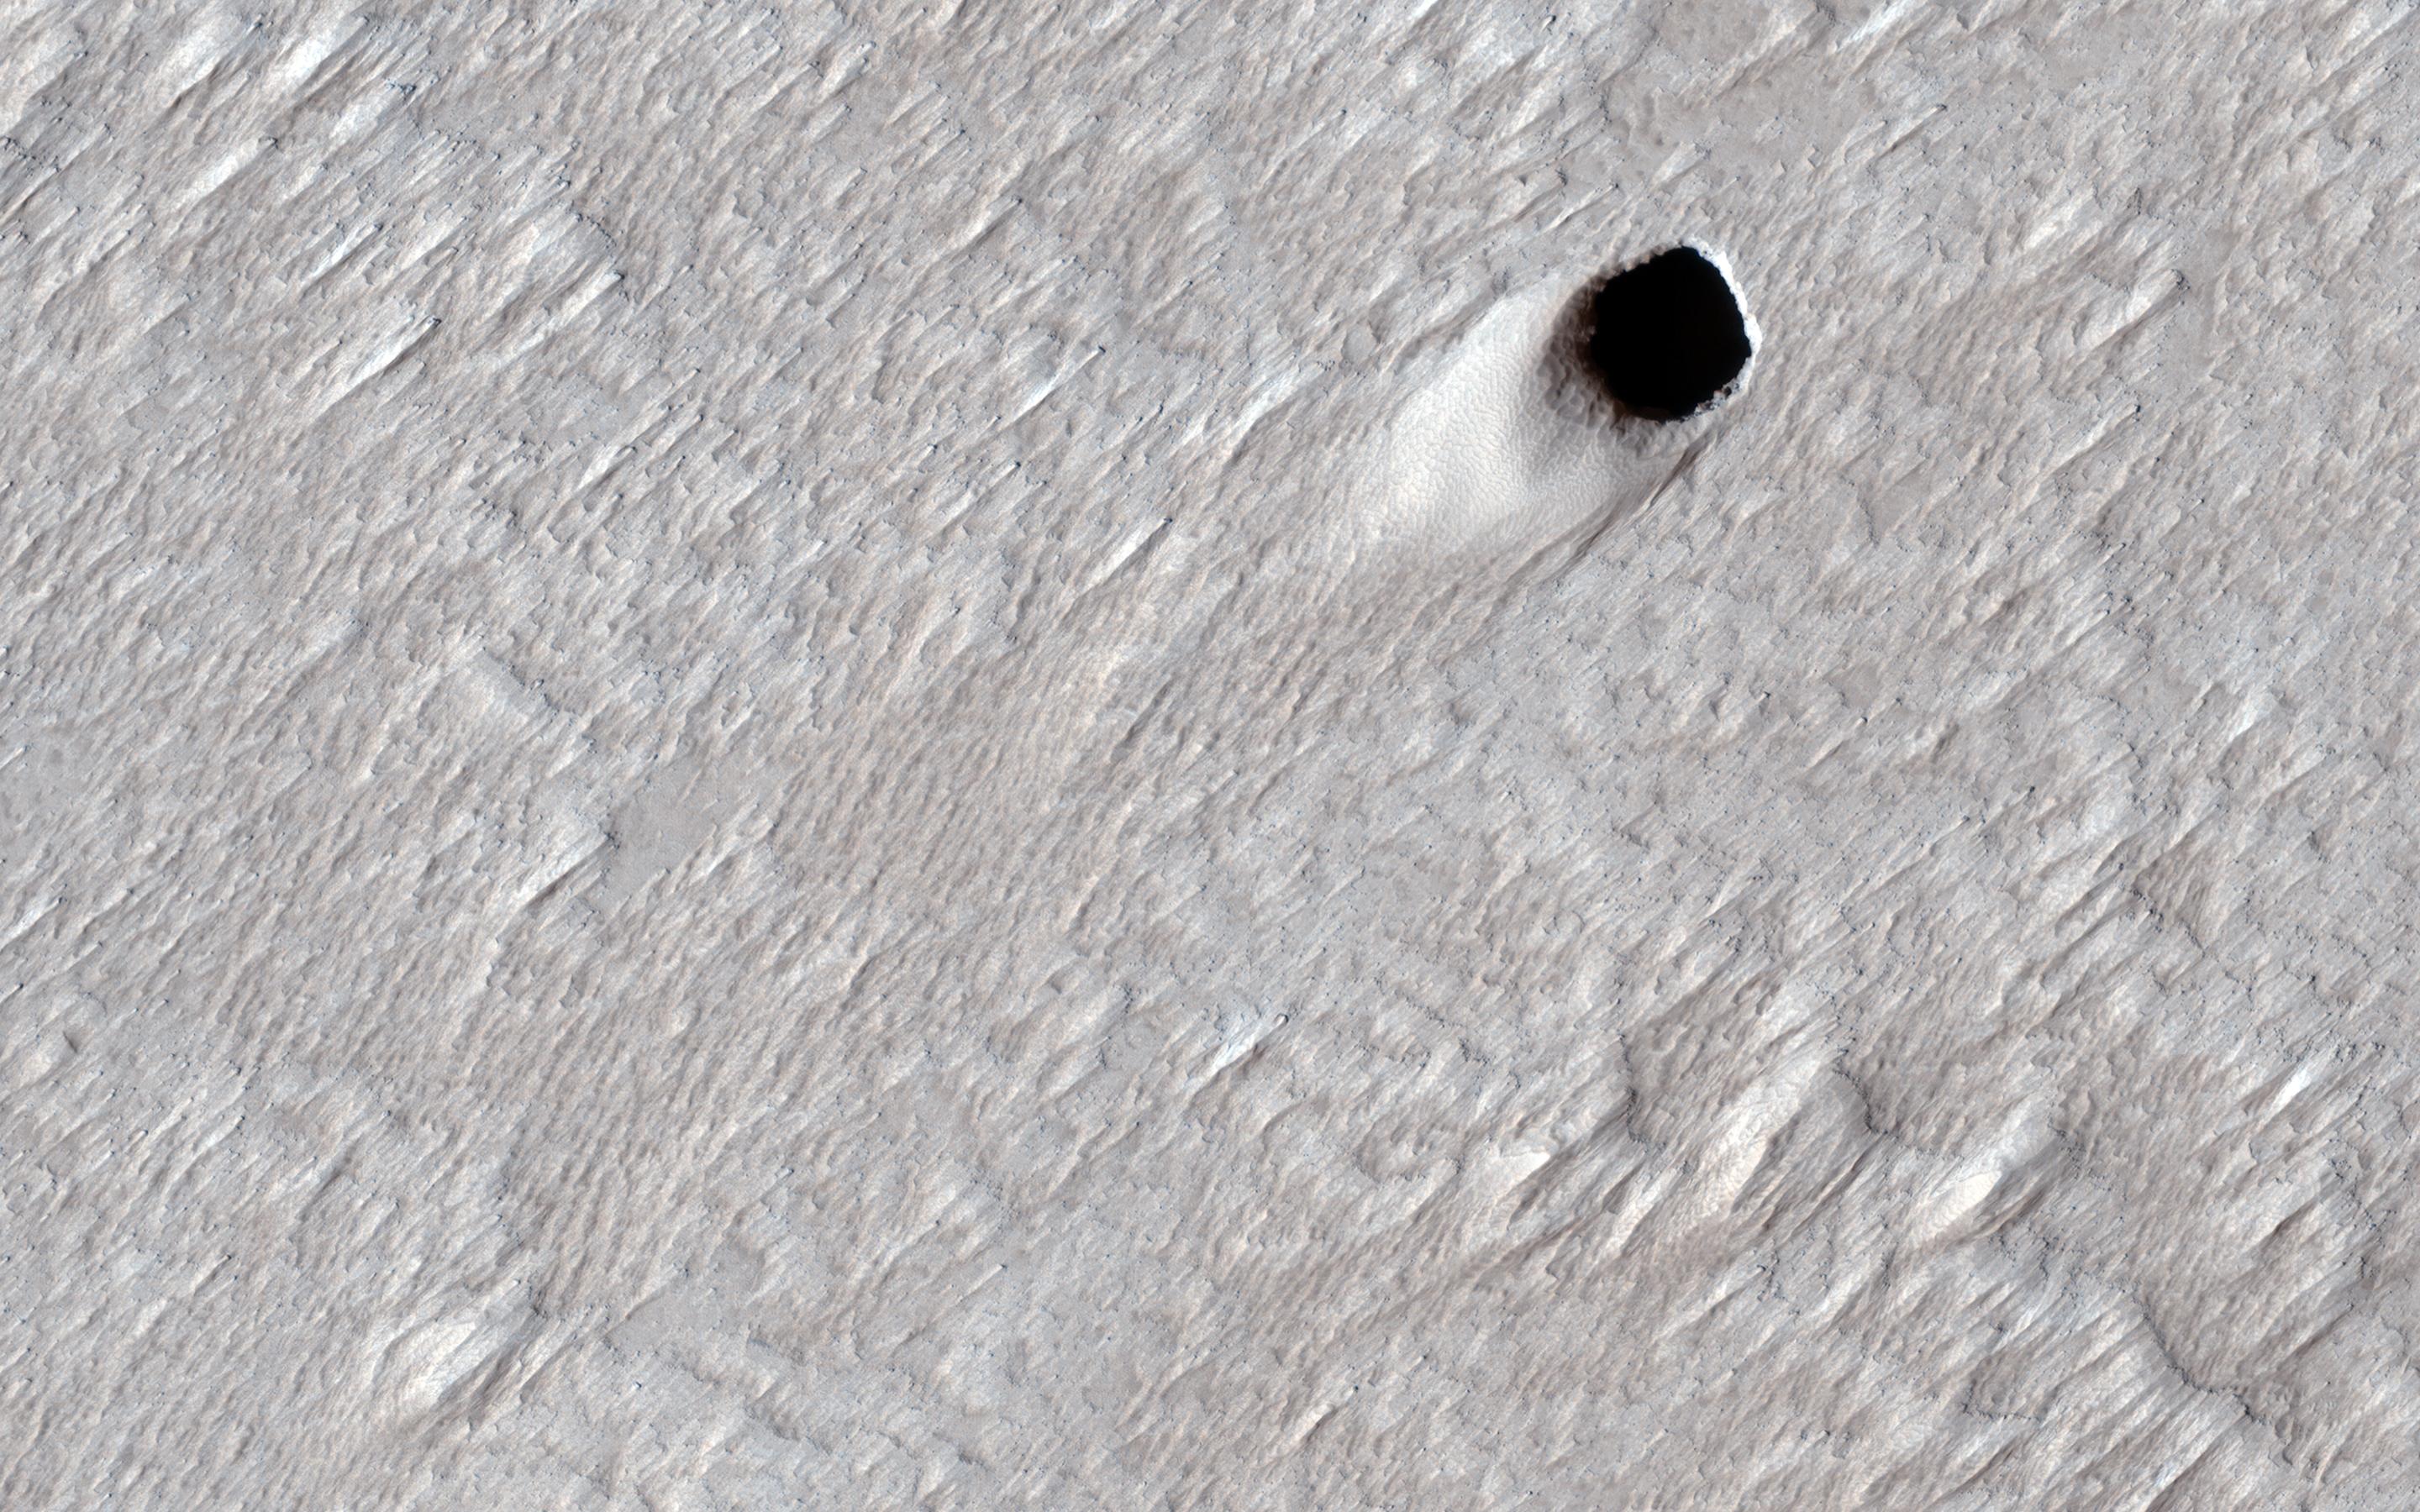 PIA24149: Pit Craters and Giant Volcanoes